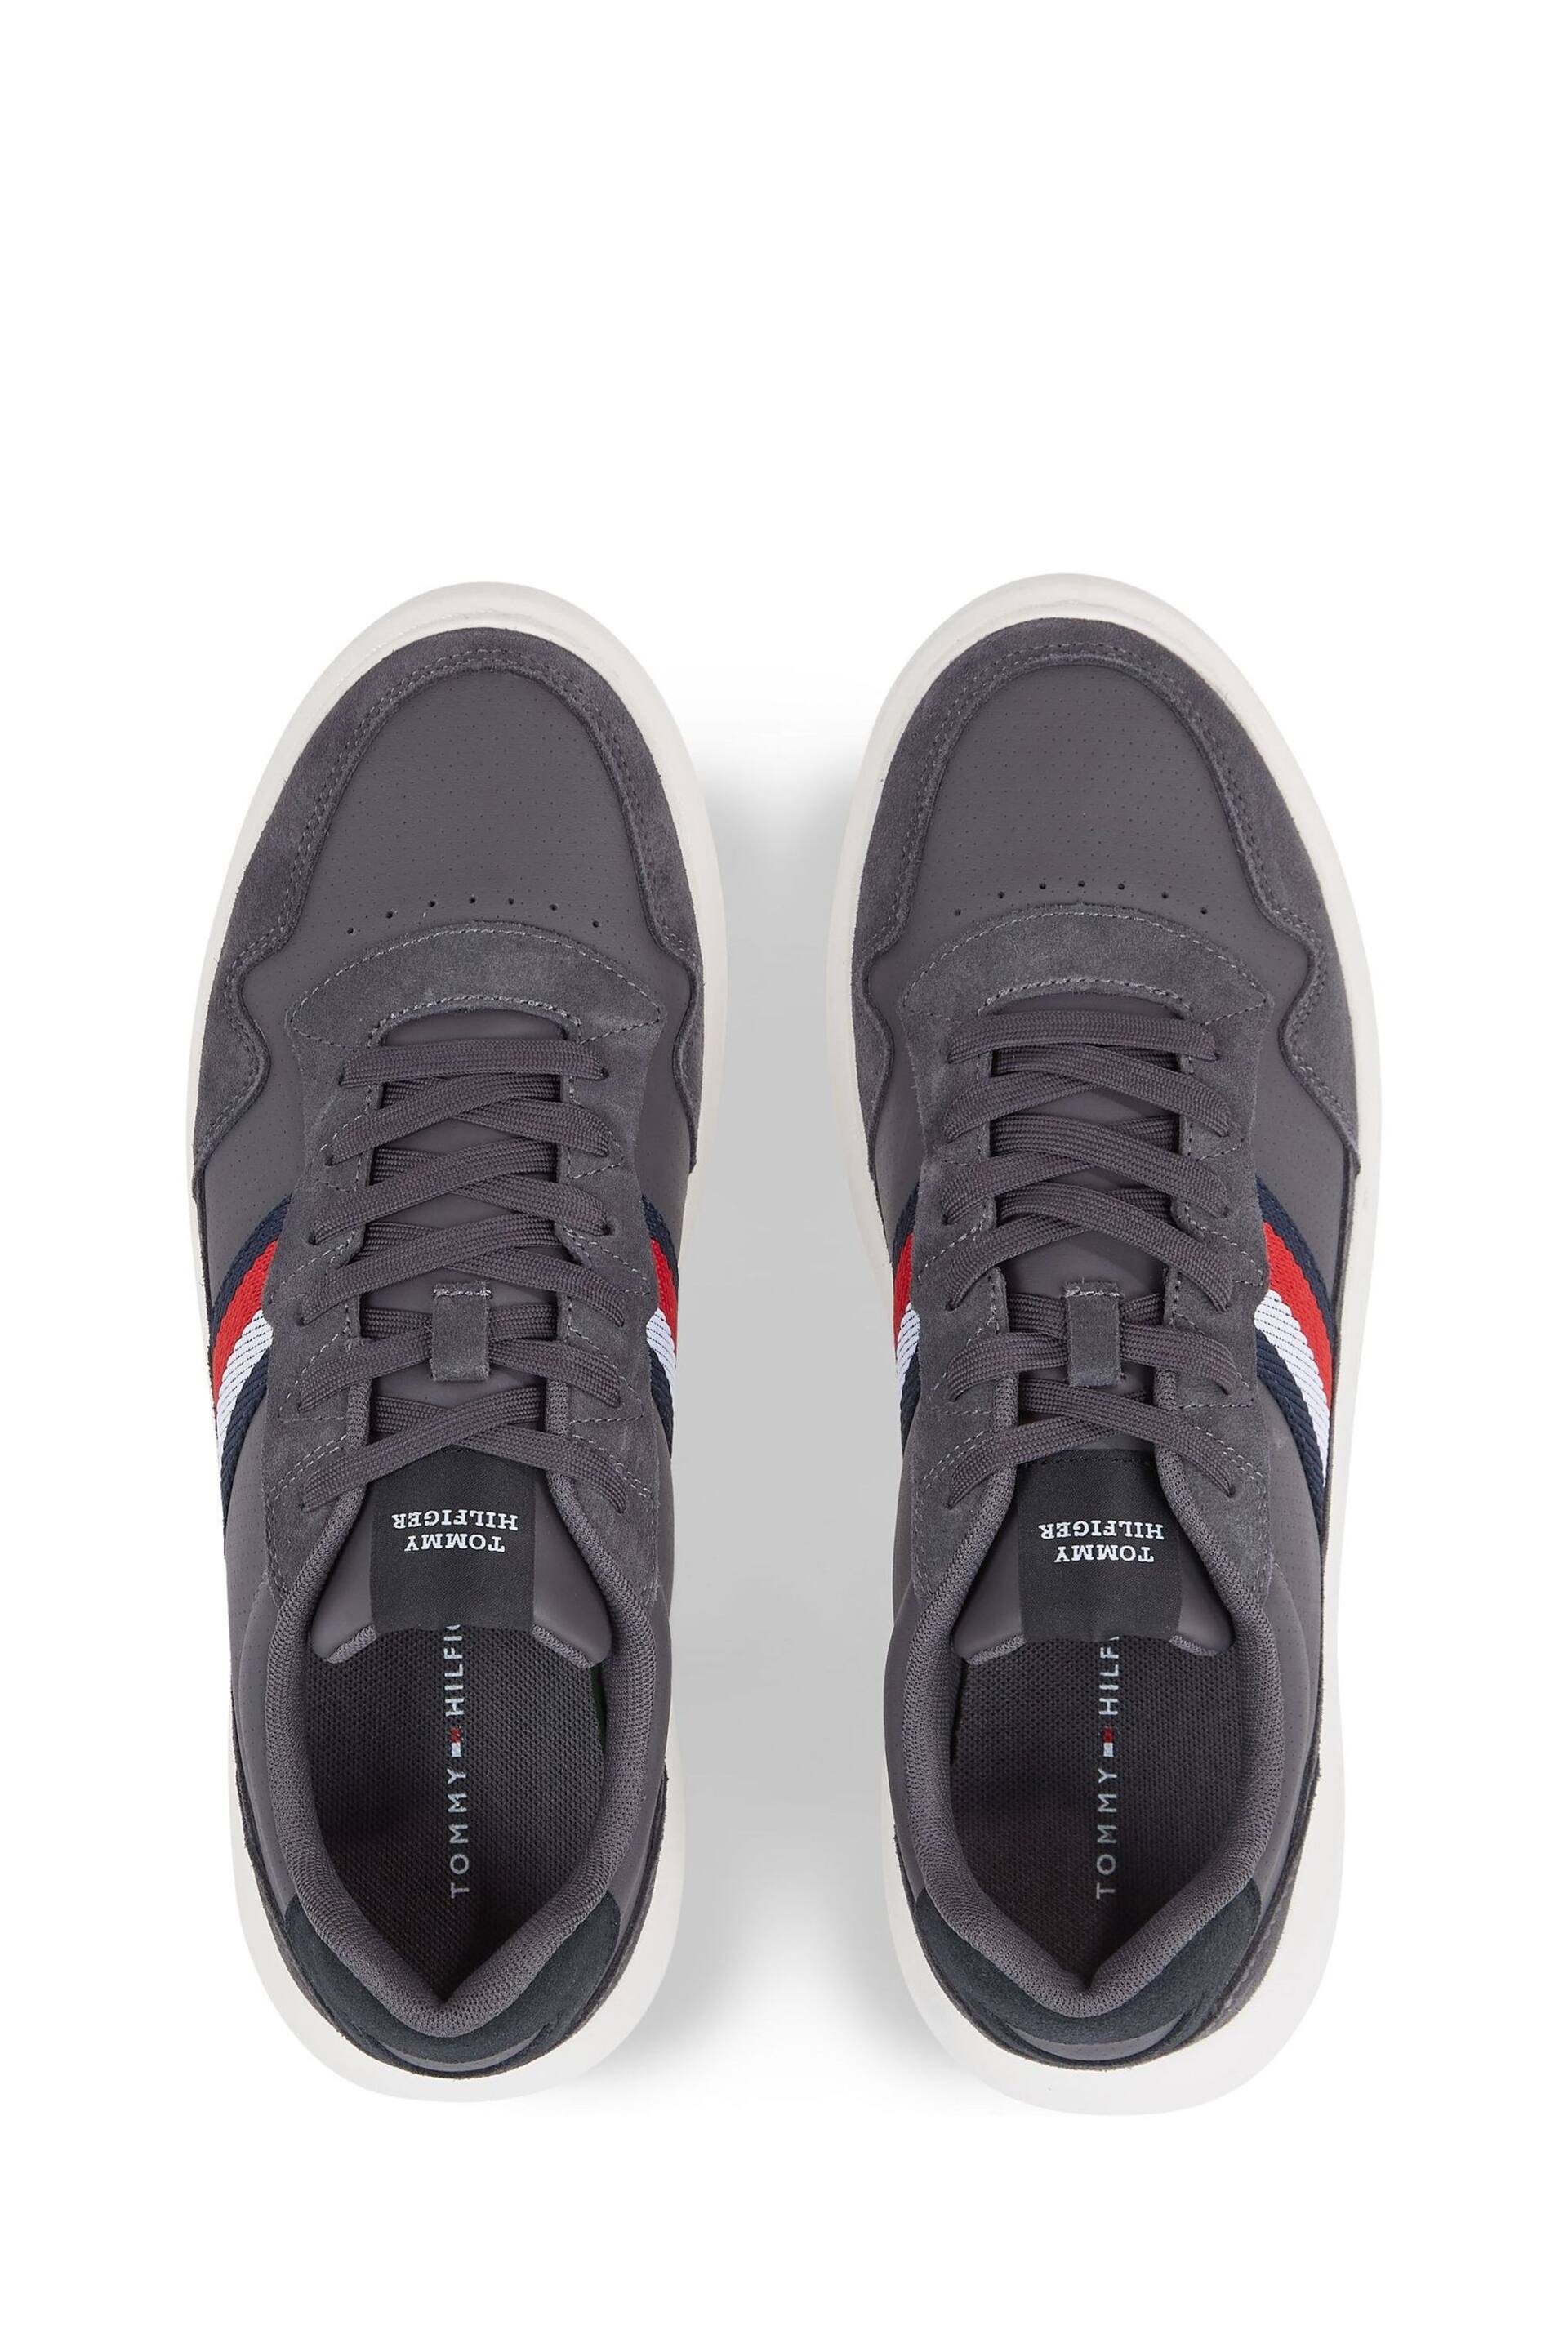 Tommy Hilfiger Silver Mix Stripes Sneakers - Image 4 of 5